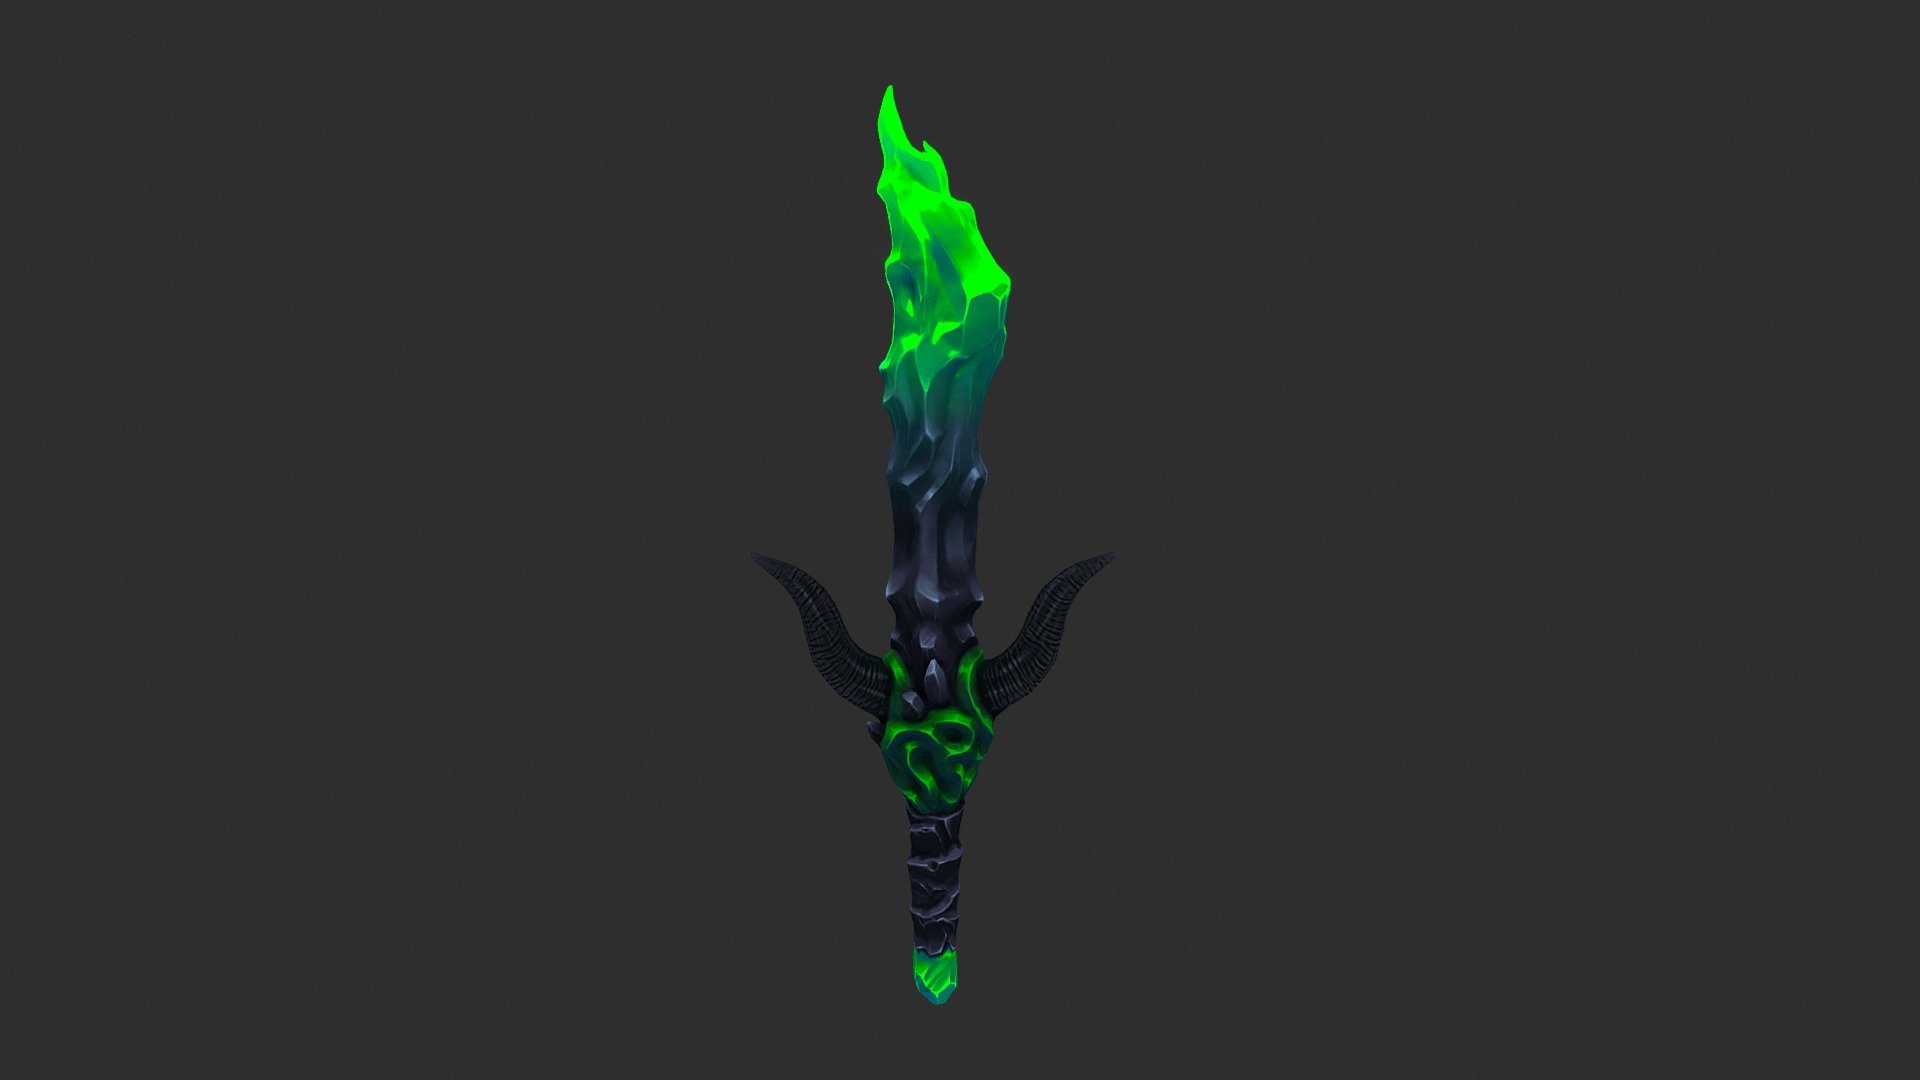 Handpainted, Warcraft inspired sword

More renders and such on my Artstation https://www.artstation.com/grizzlewood - Stylized Demon Sword - 3D model by Grizzlewood 3d model